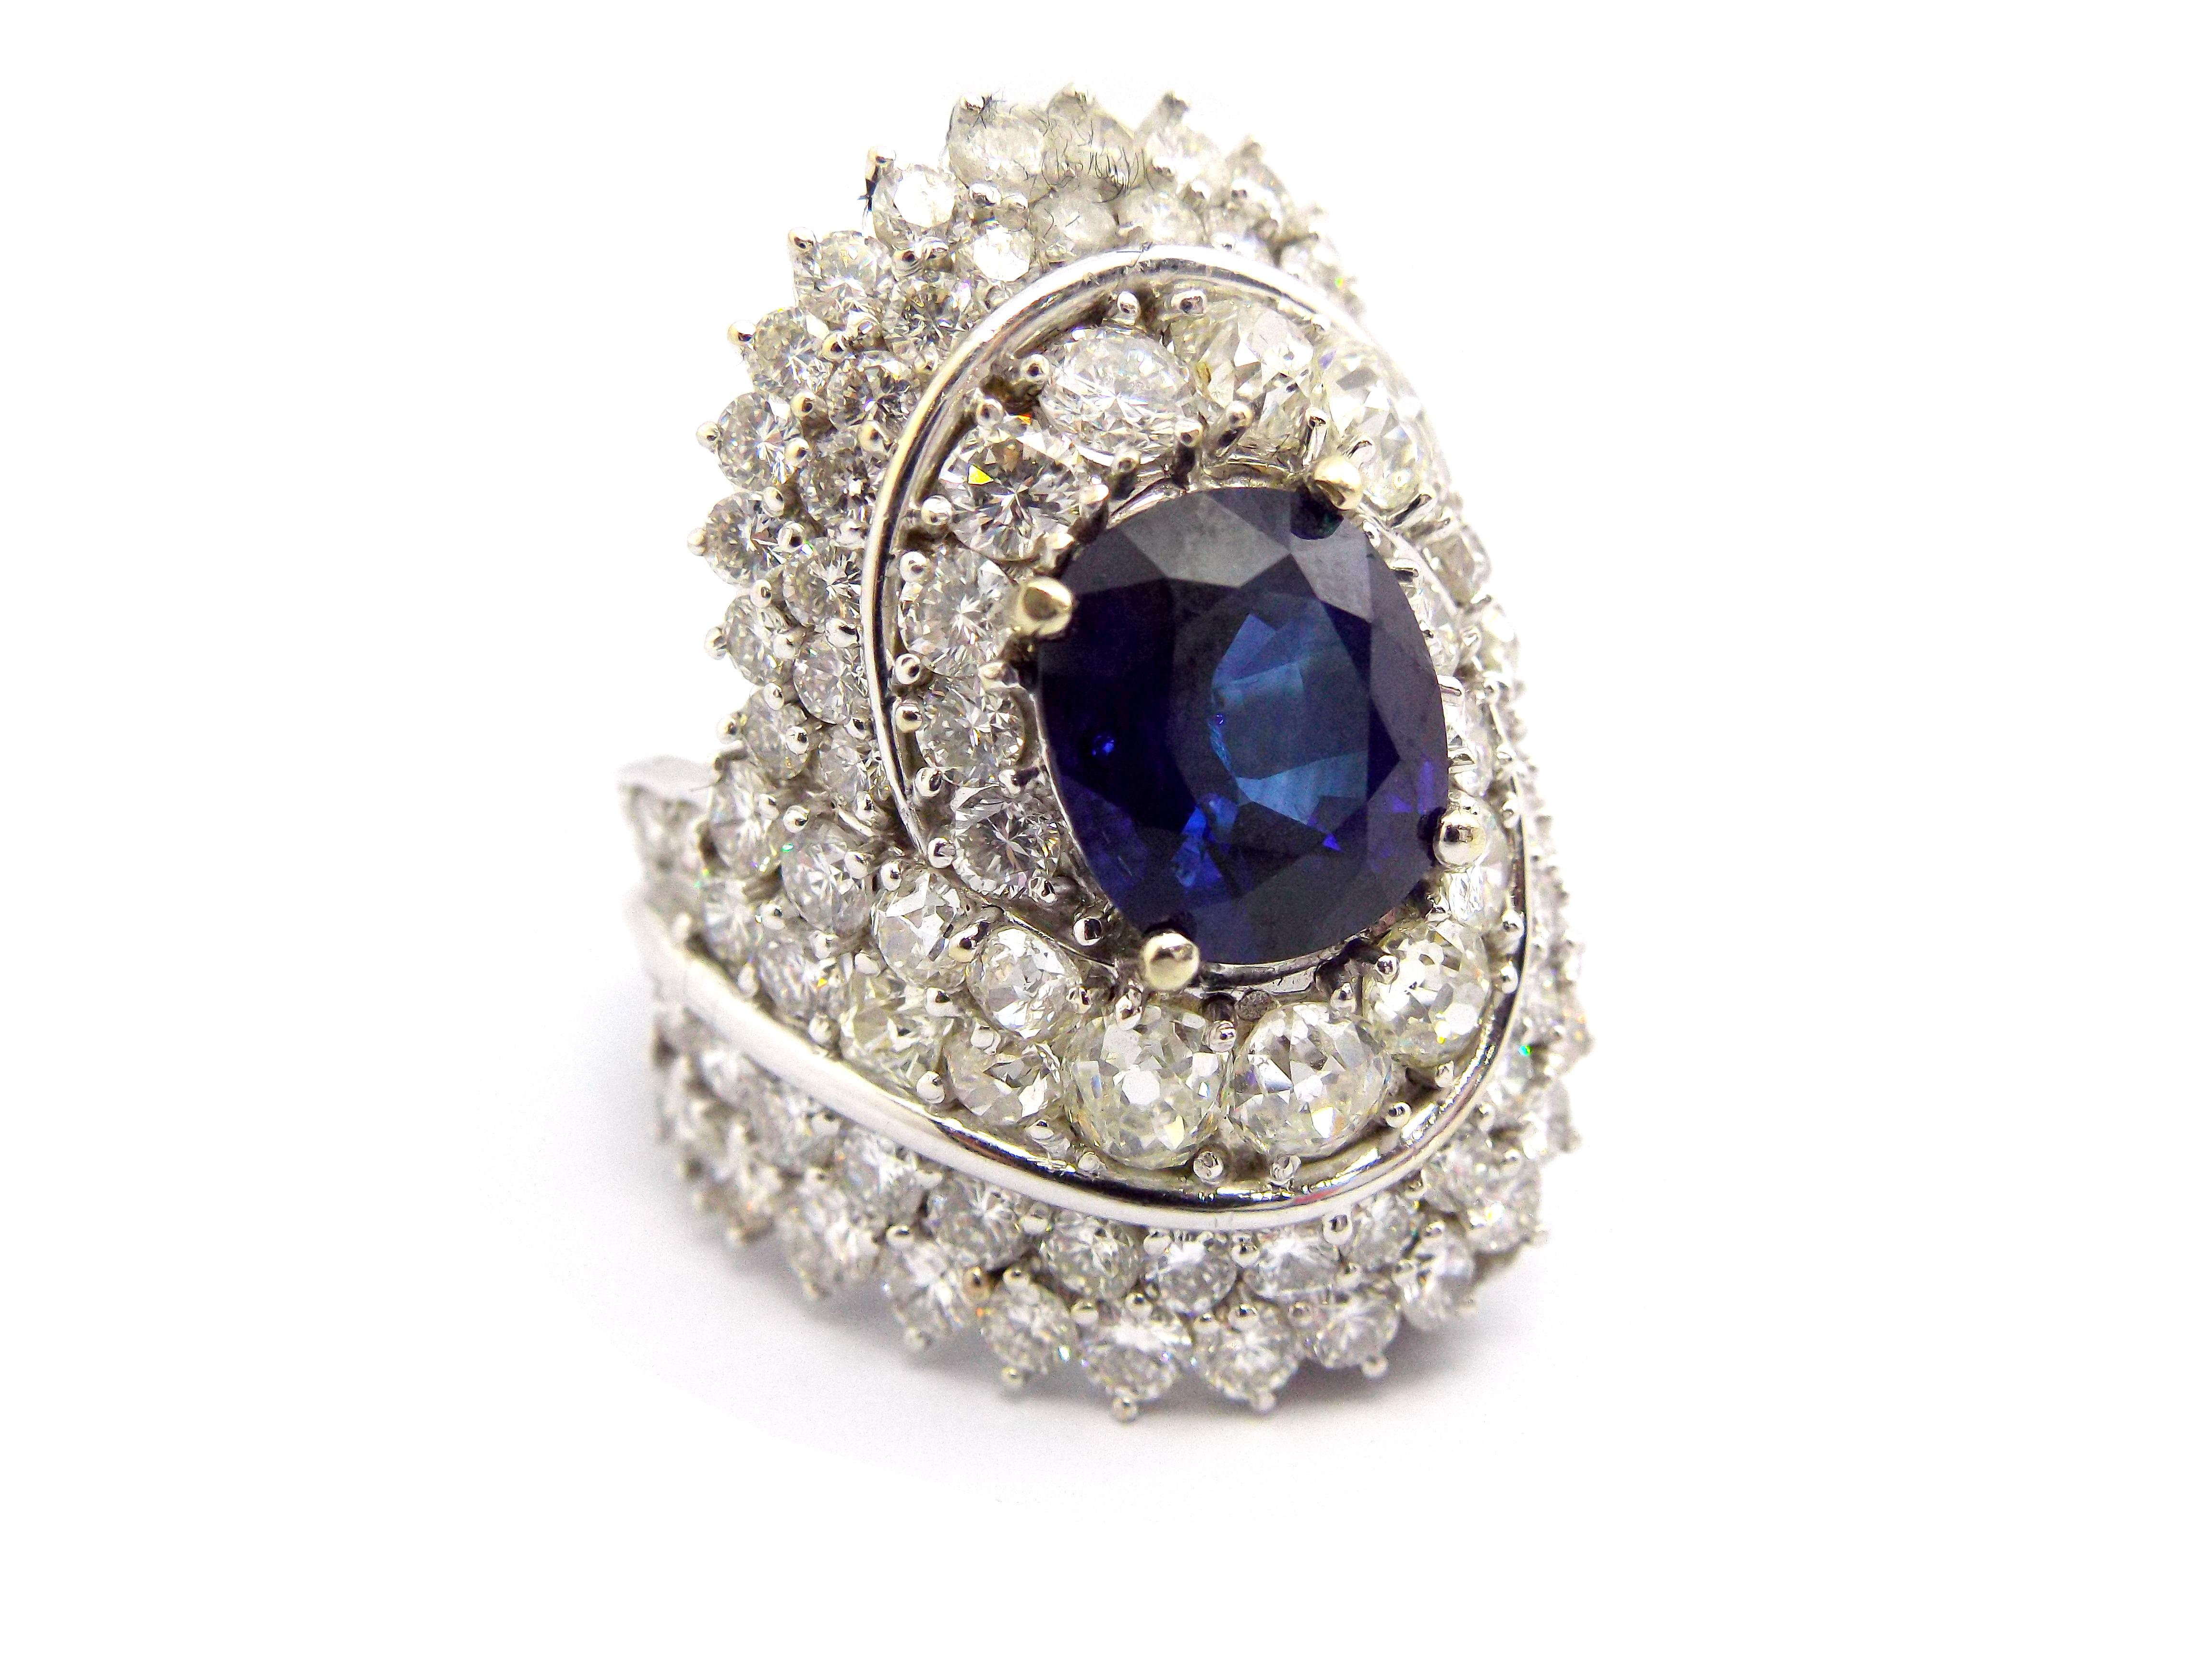 18K White Gold 5.08ct Sapphire 9.6ct Diamond Ring Size 9 3/4 For Sale 2